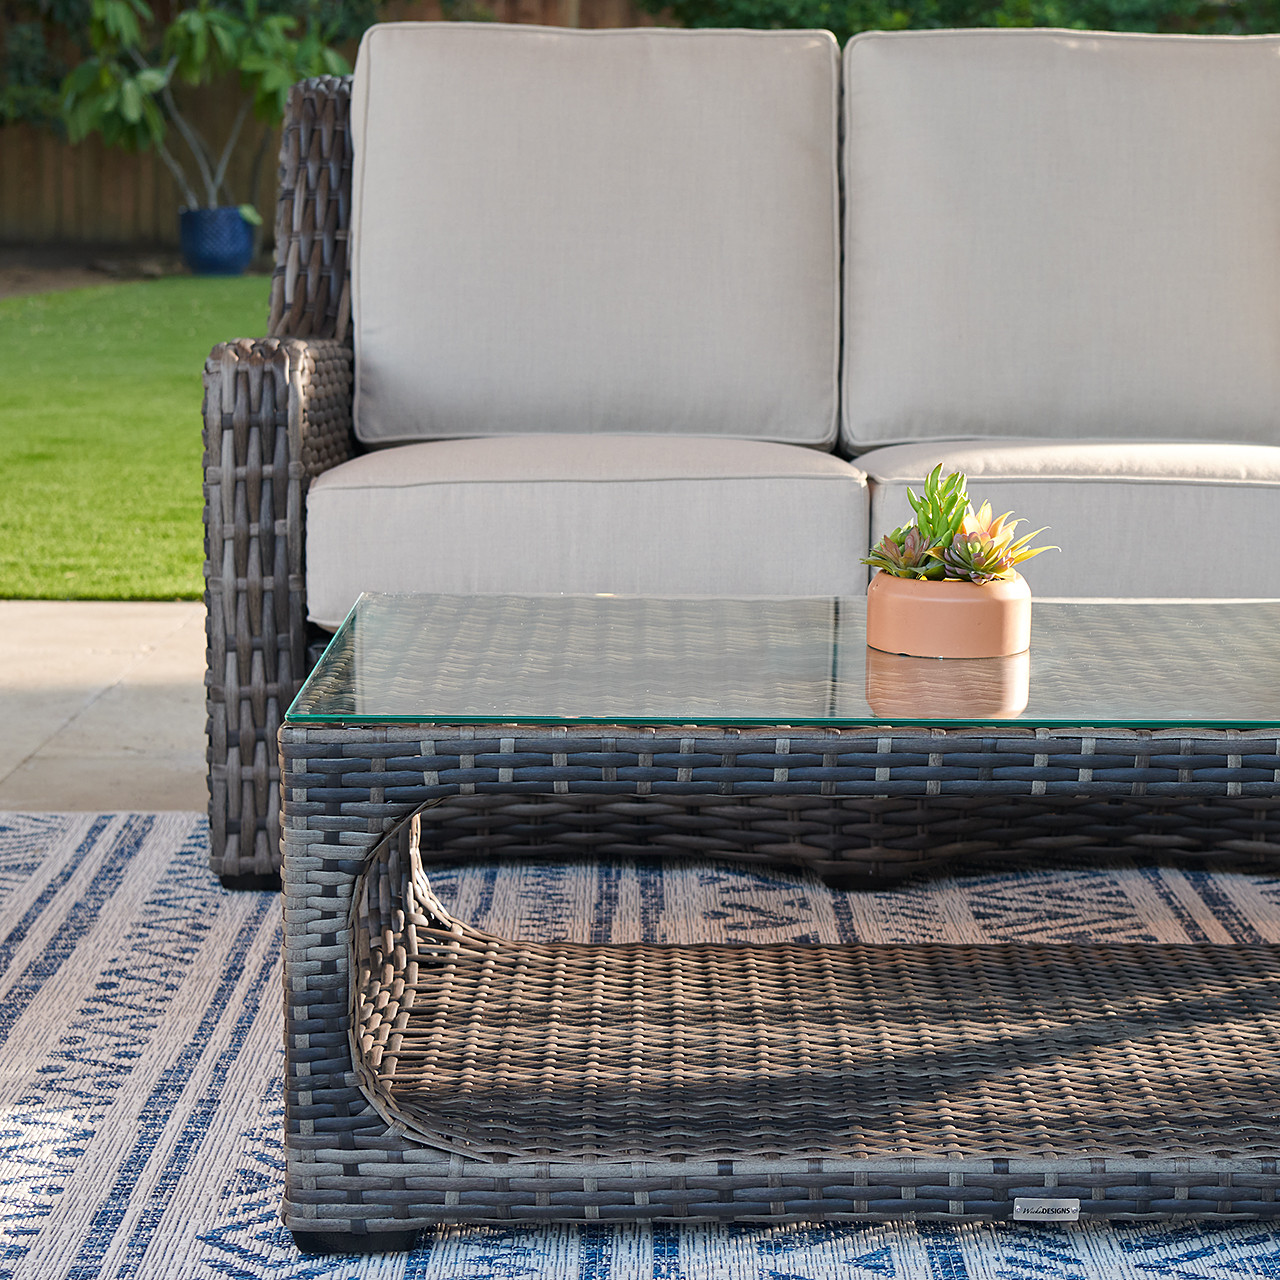 Tangiers Canola Seed Outdoor Wicker with Cushions 3 Piece Swivel Sofa Group + 46 x 26 in. Glass Top Coffee Table